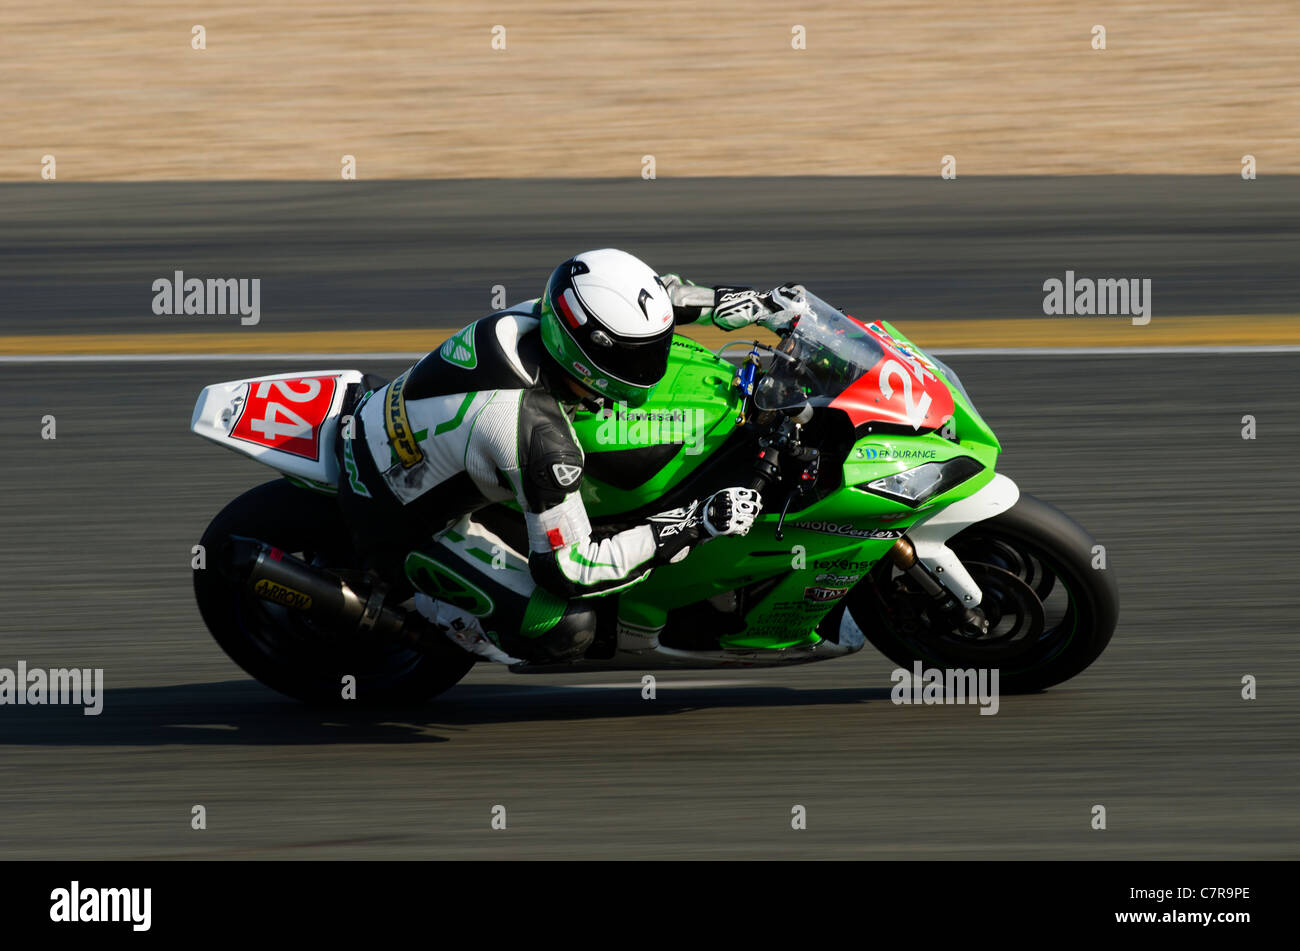 Kawasaki 24 (Team 3D endurance) during the 2011 24 hours of Le Mans Stock Photo